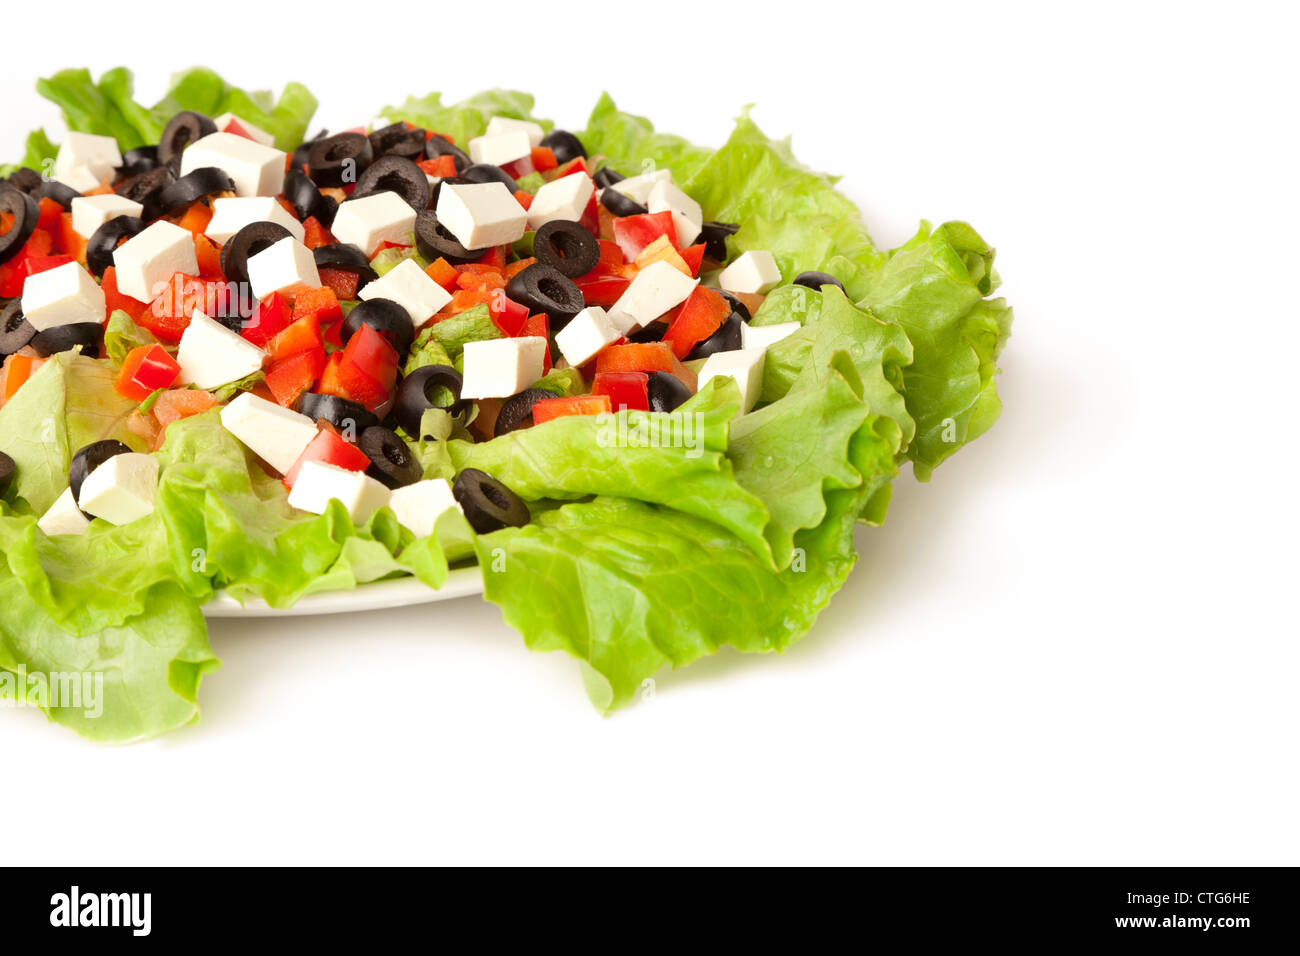 Picture of a greek salad on the plate isolated on white Stock Photo